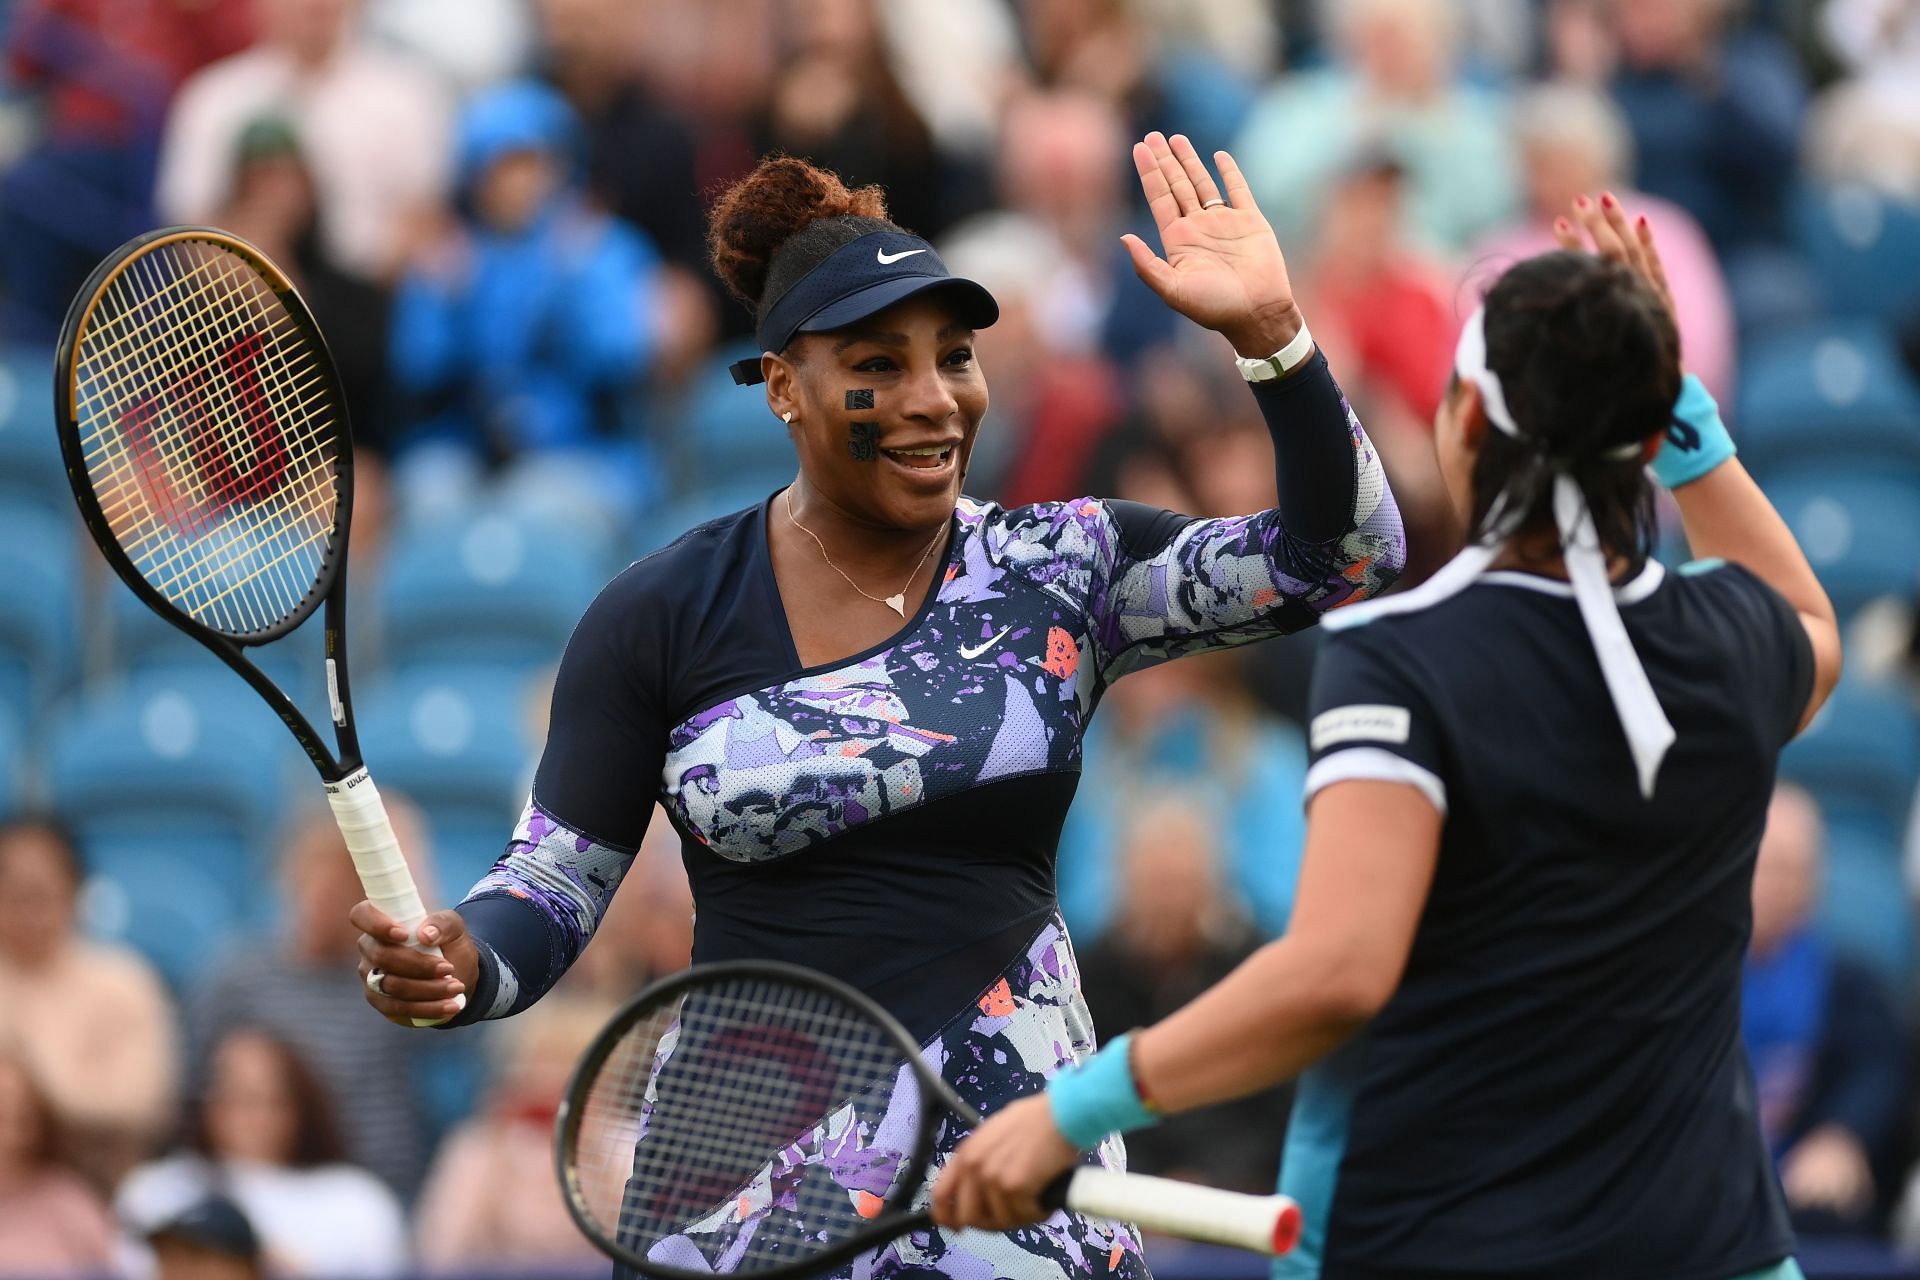 Serena Williams and Ons Jabeiur during their match in Eastbourne